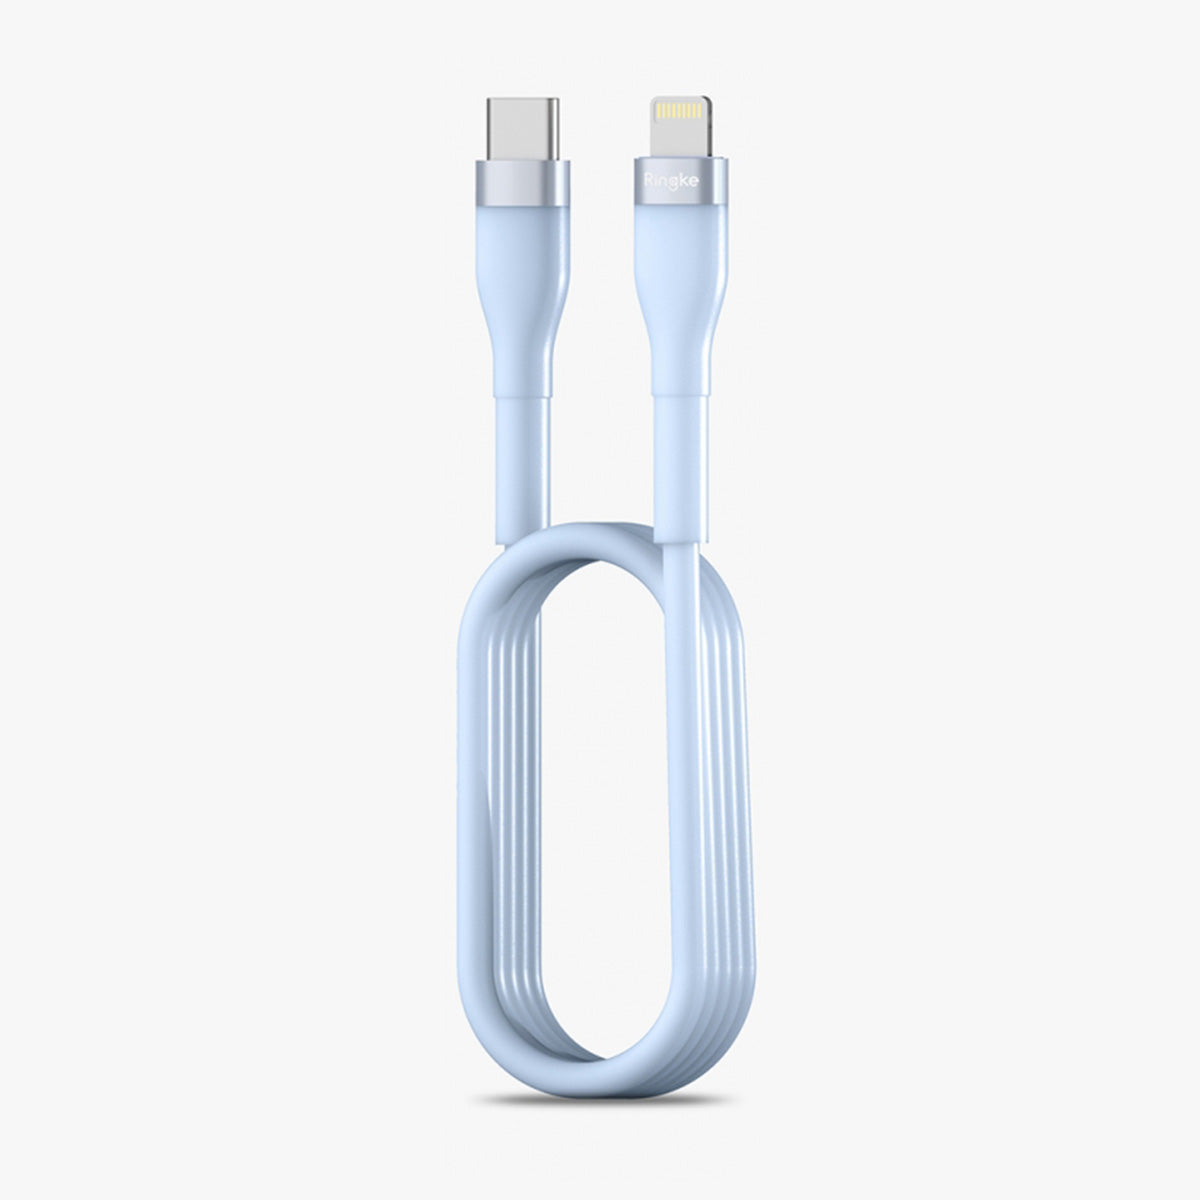 Ringke USB-C to Lighting Pastel Charging Cable (2m)